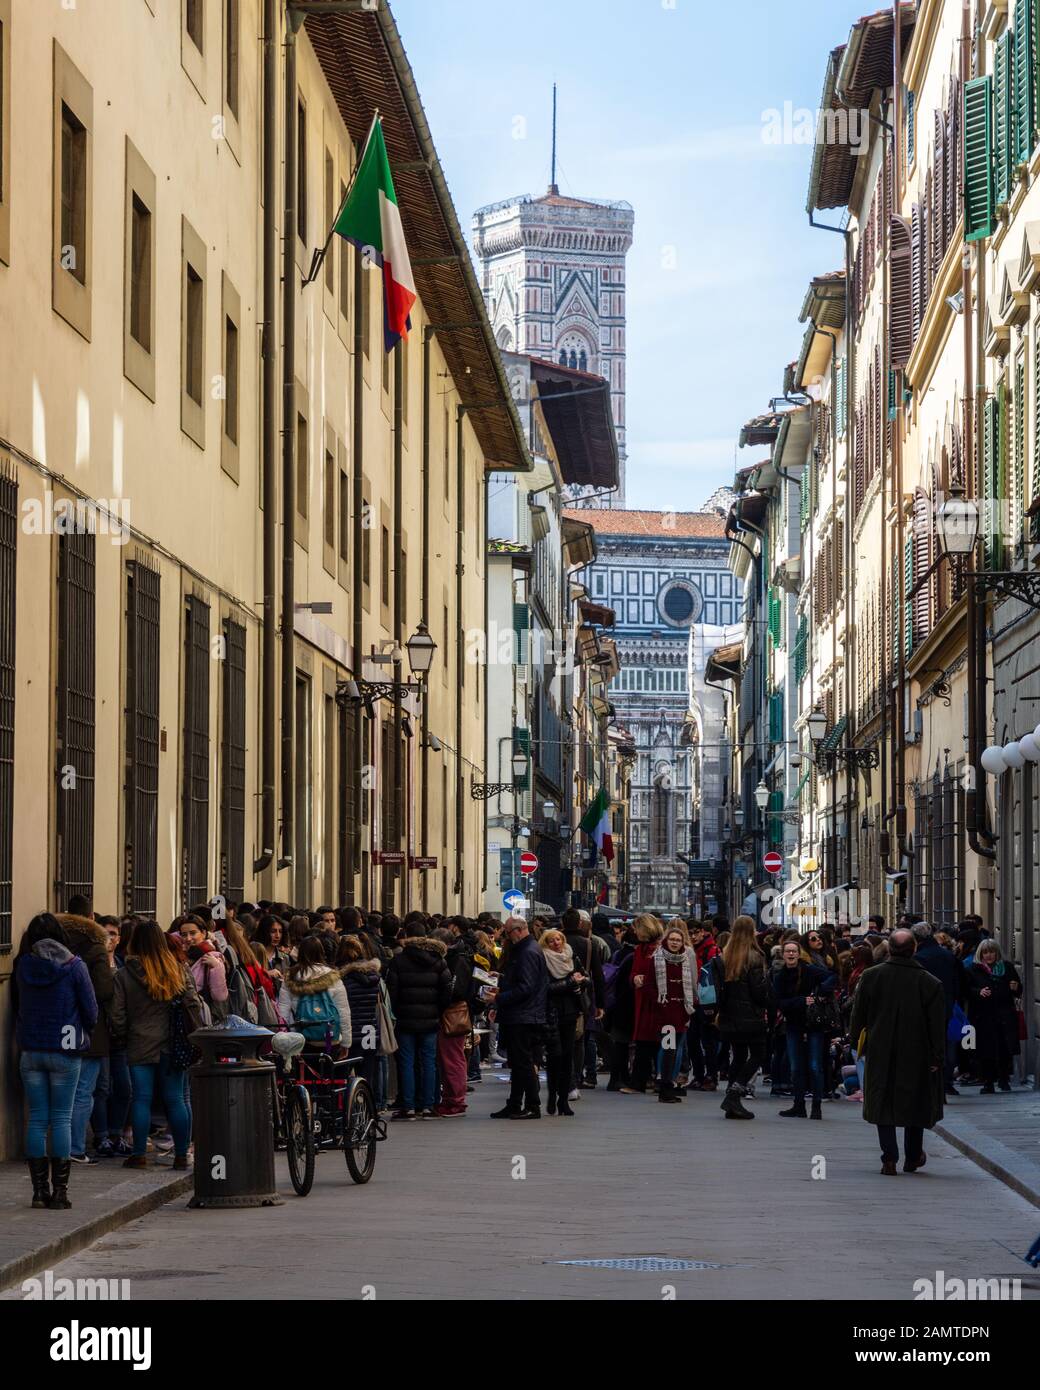 Florence, Italy - March 23, 2018: Crowds of tourists queue for museums in the old city of Florence, with the Duomo cathedral in the distance. Stock Photo